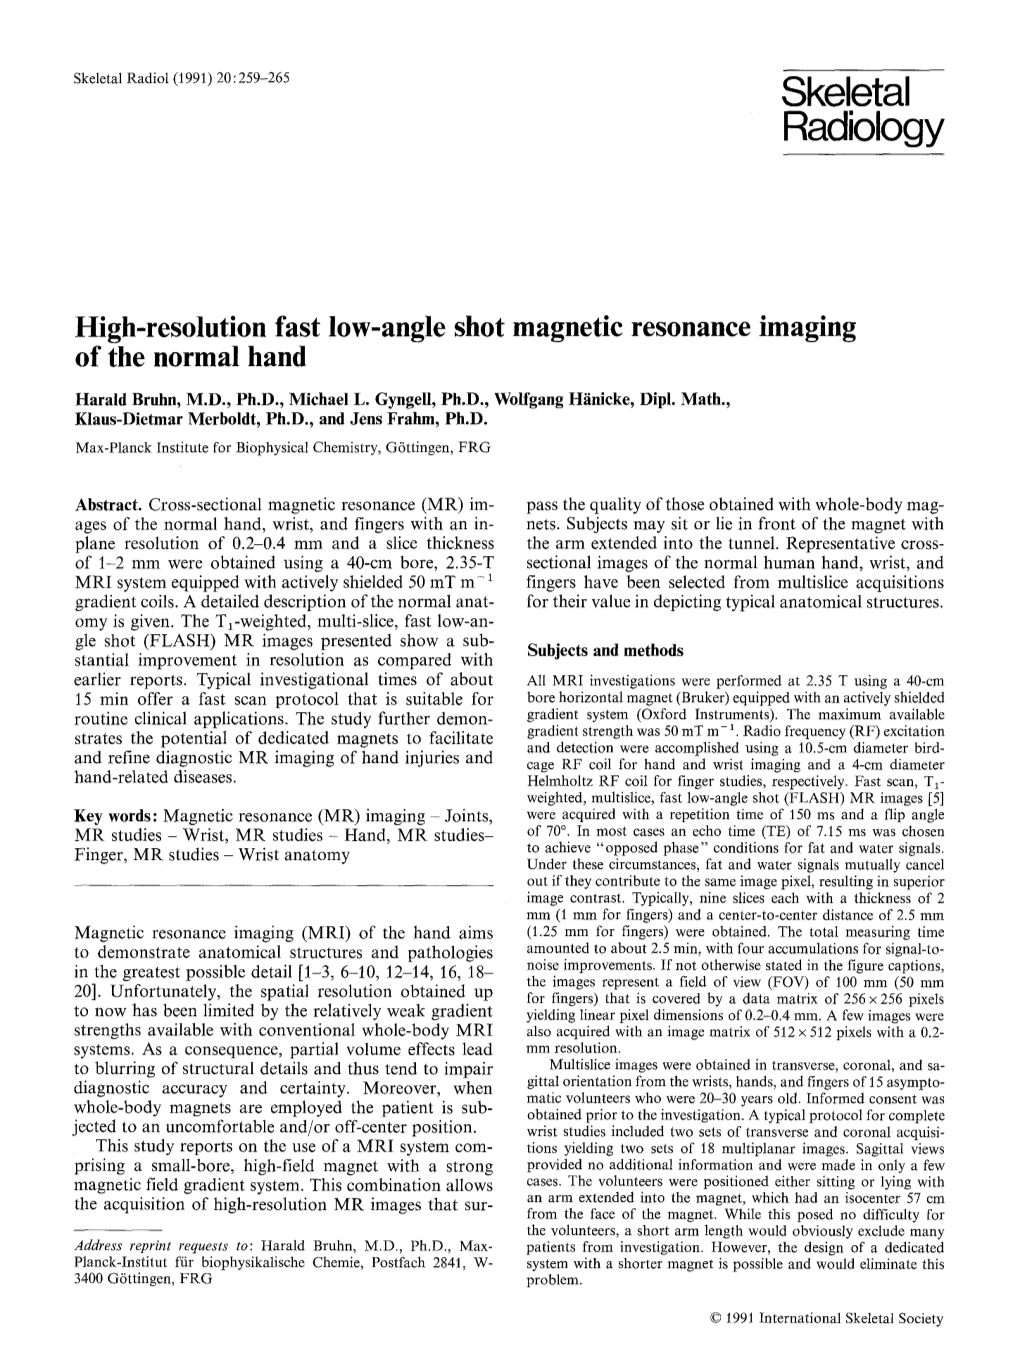 High-Resolution Fast Low-Angle Shot Magnetic Resonance Imaging of the Normal Hand